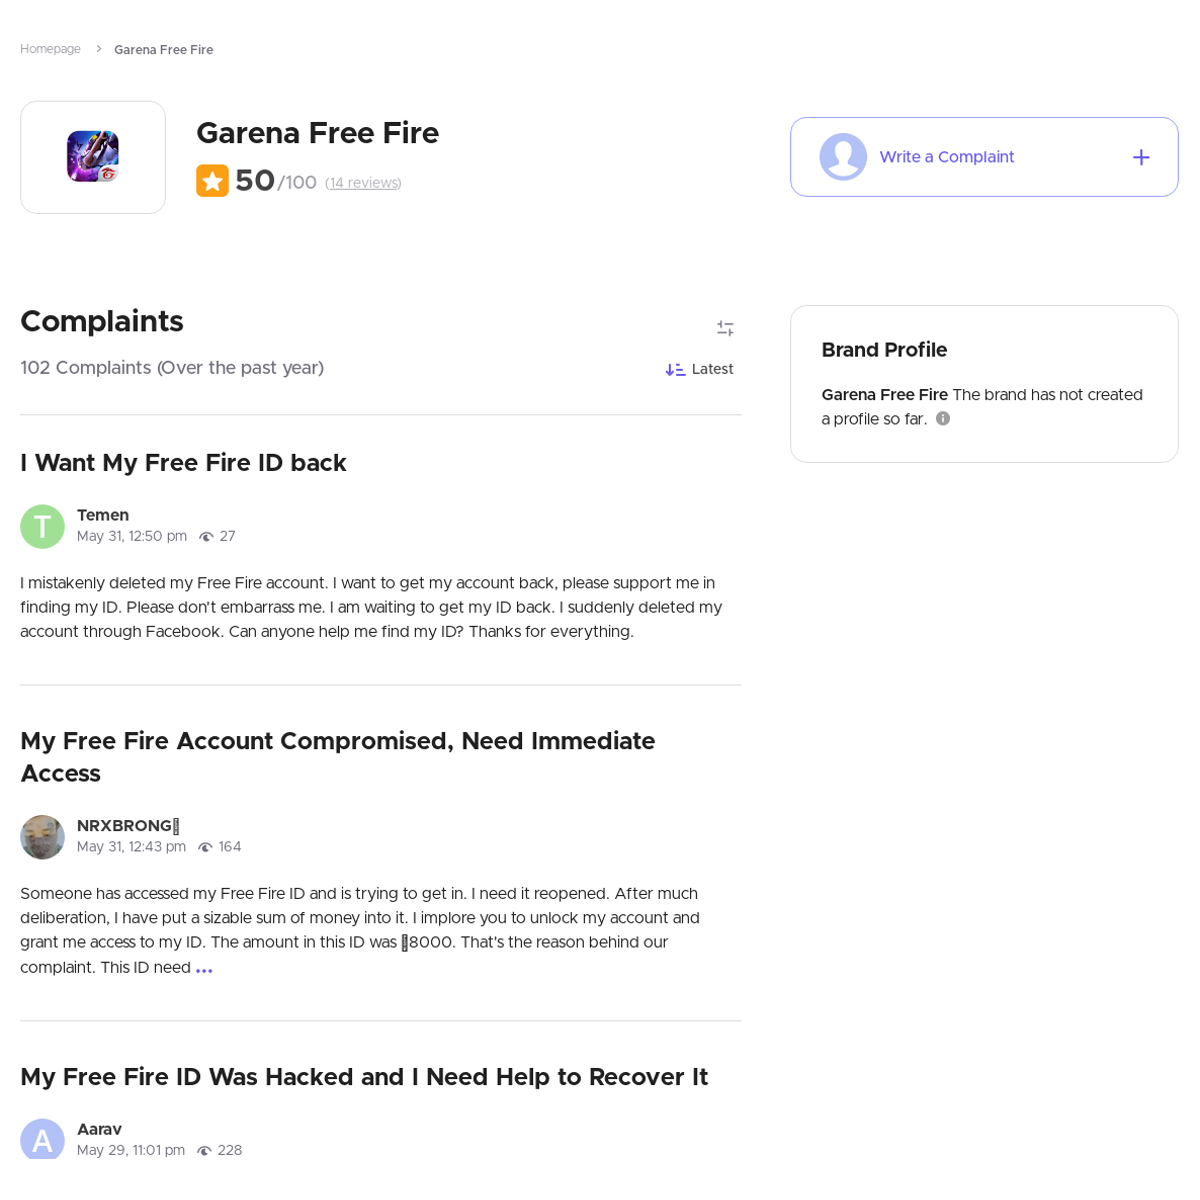 Garena Free Fire: Report hackers and diamond purchase issues